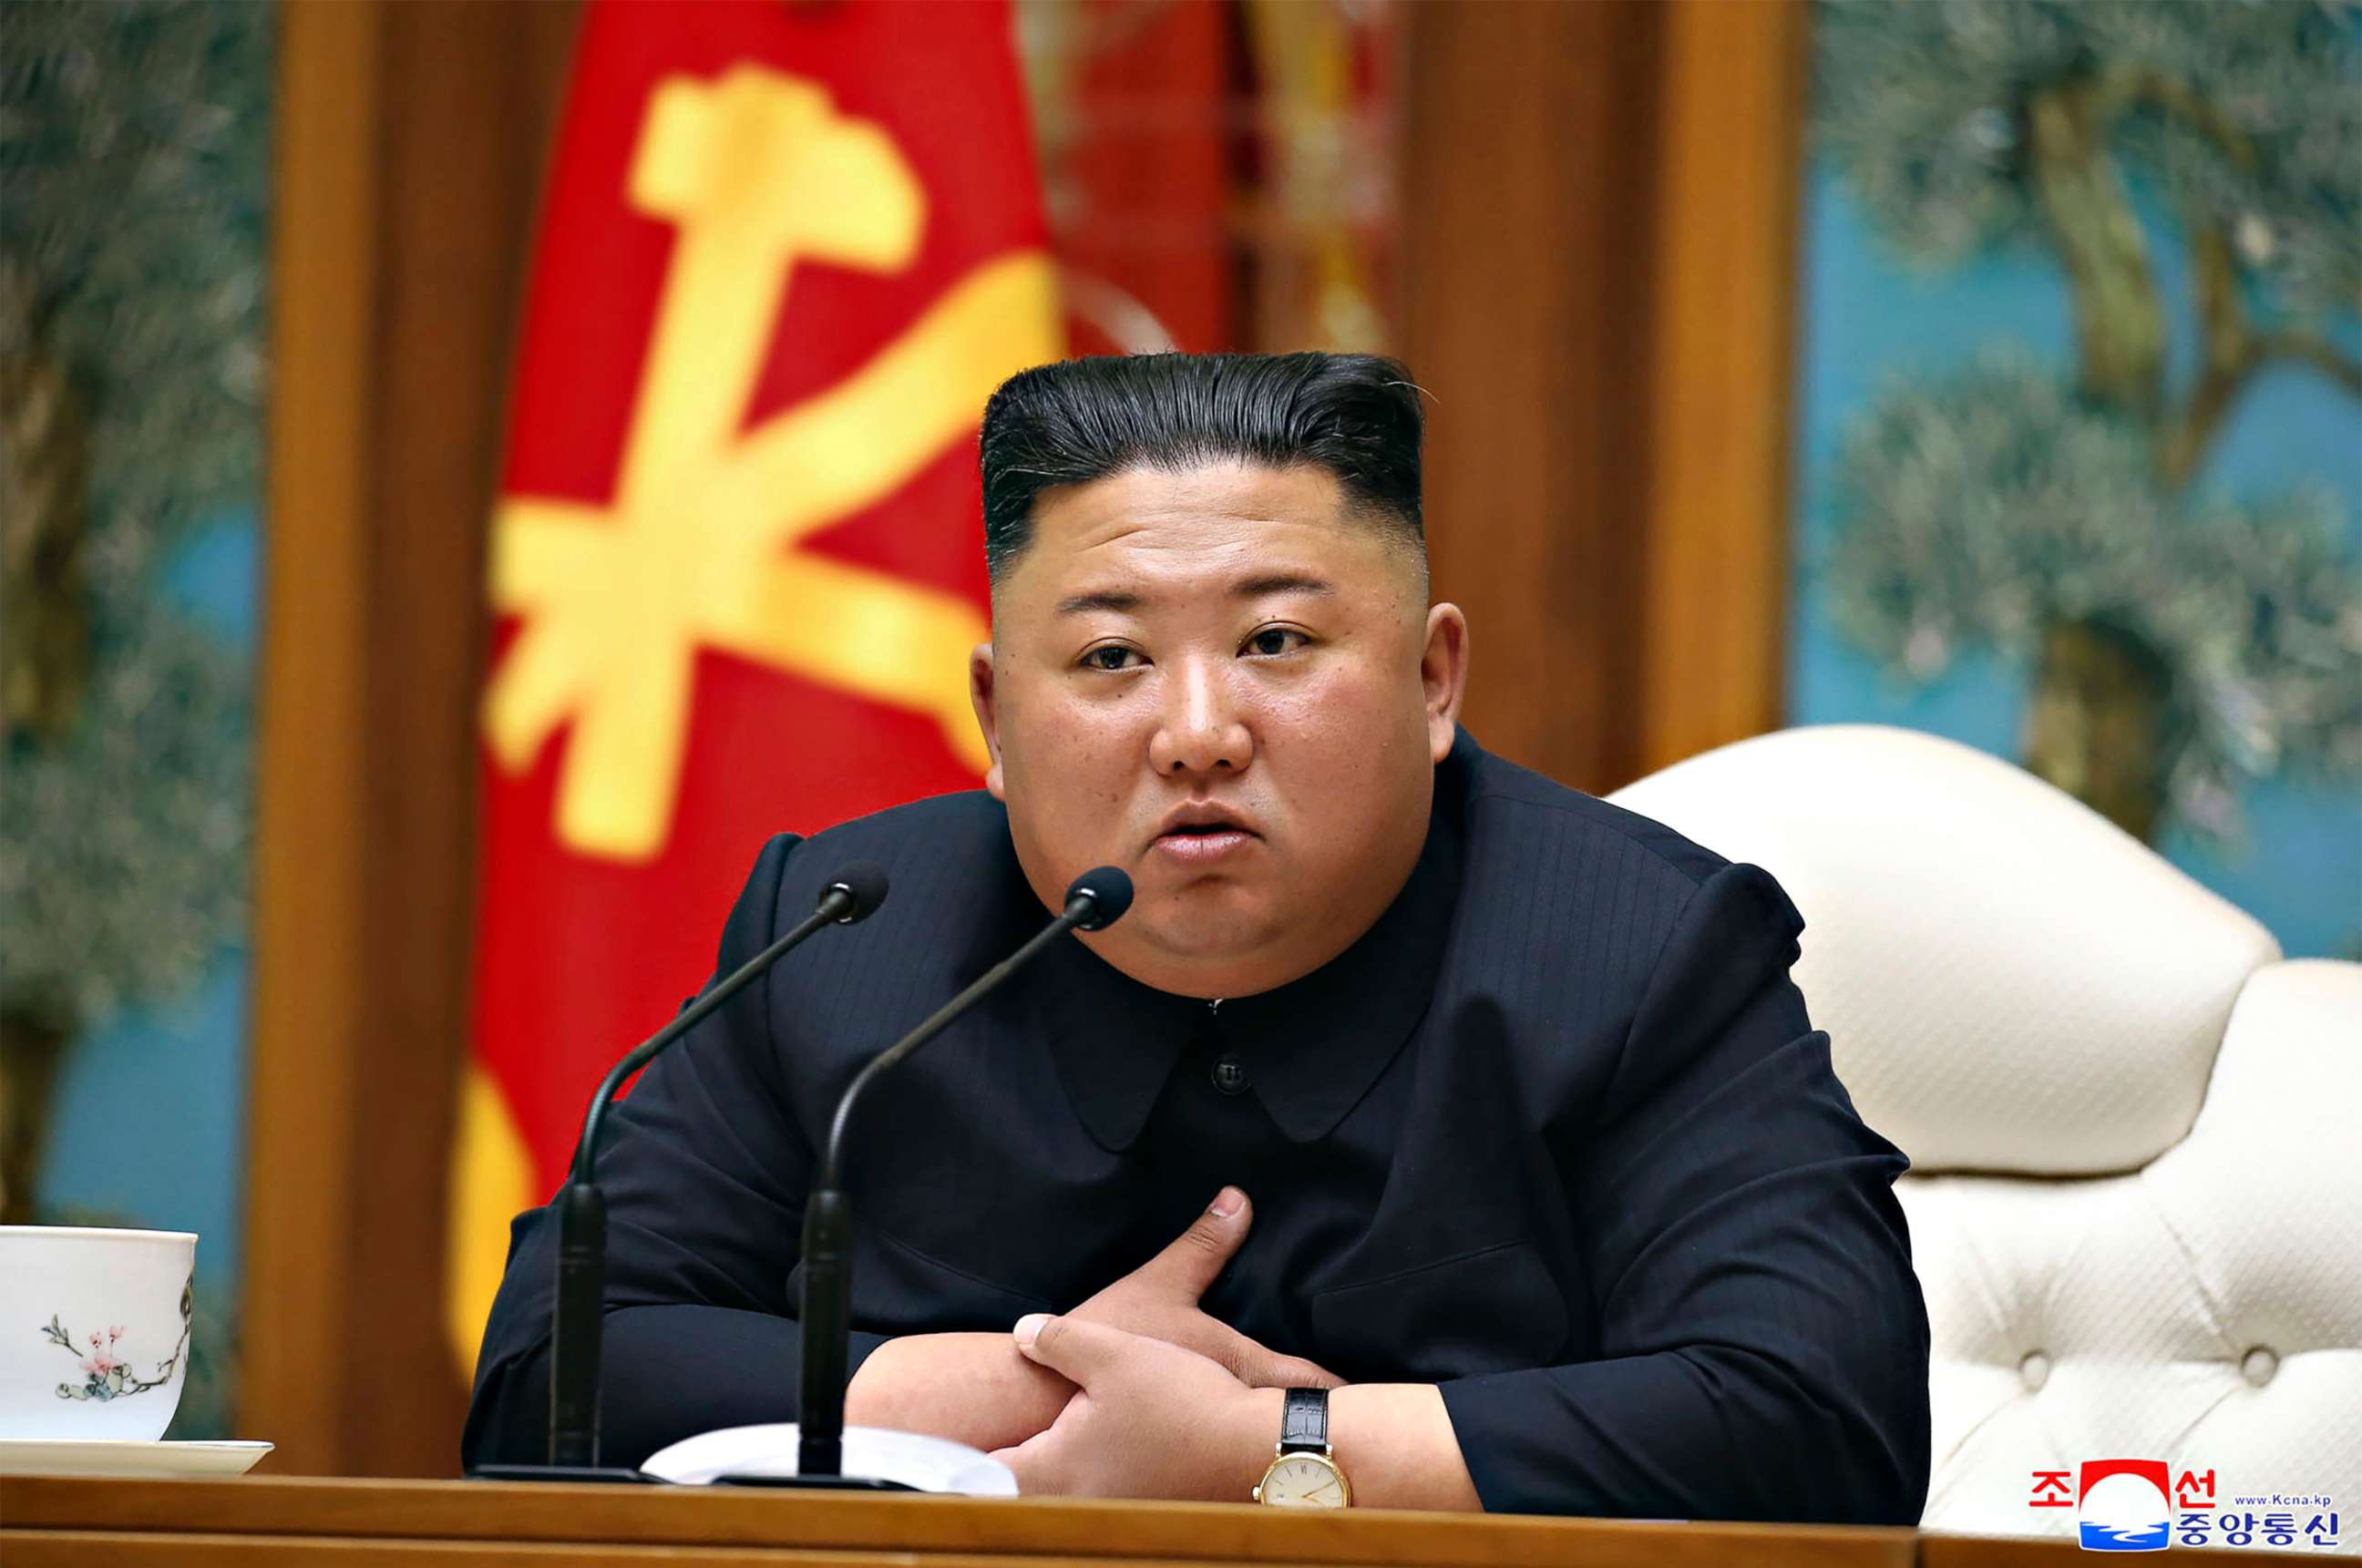 PHOTO: In this Saturday, April 11, 2020, photo provided by the North Korean government, North Korean leader Kim Jong Un attends a politburo meeting of the ruling Workers' Party of Korea in Pyongyang.